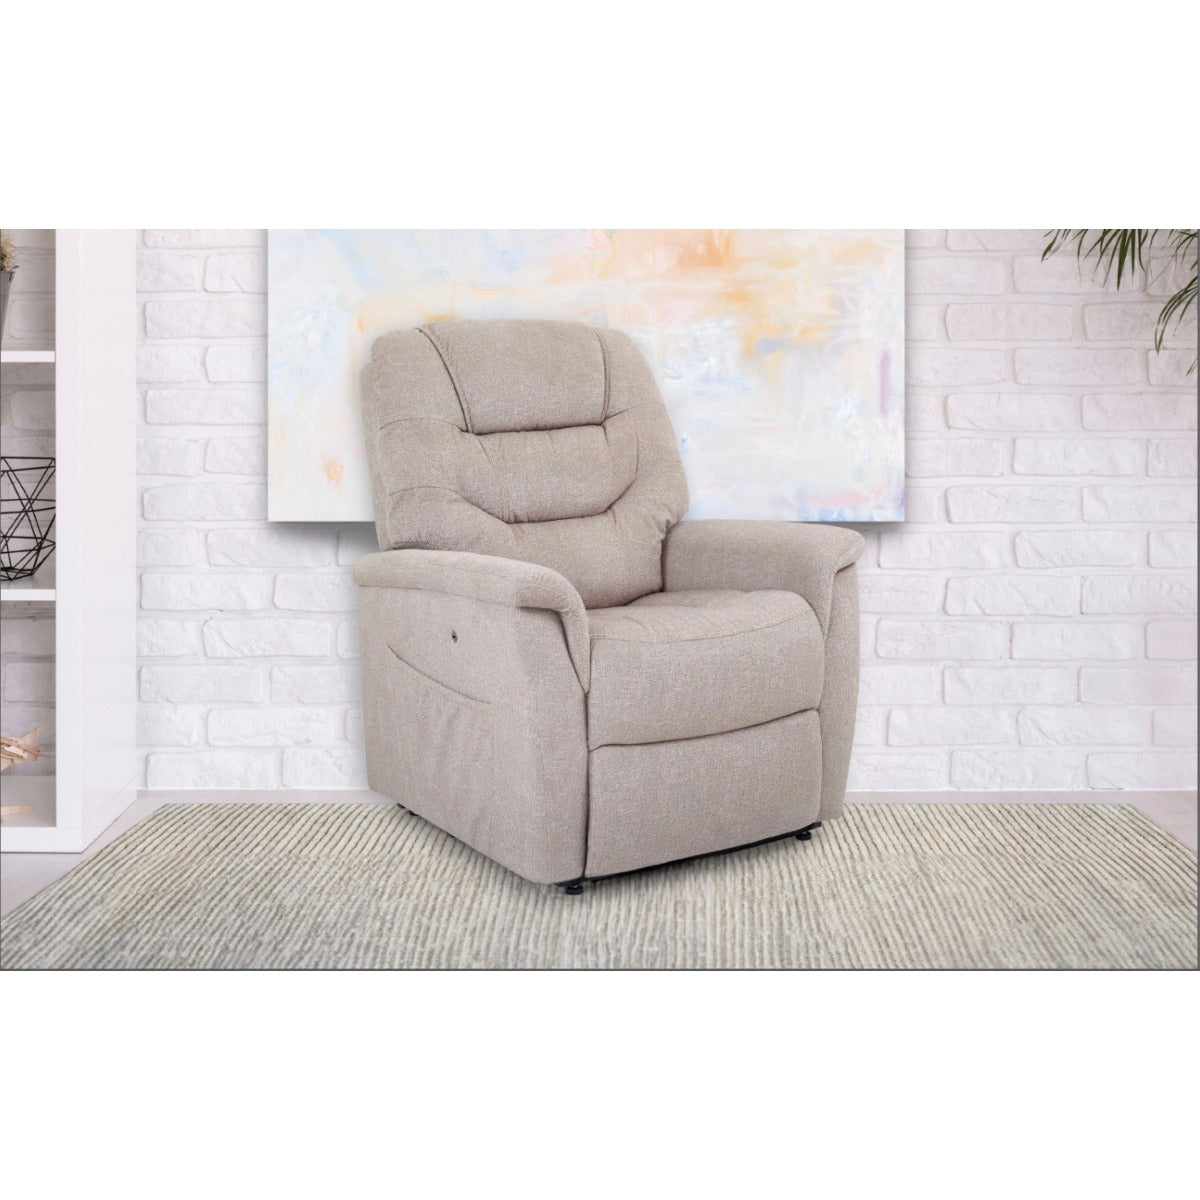 Marabella Power Lift Chair Recliner, seated, room view